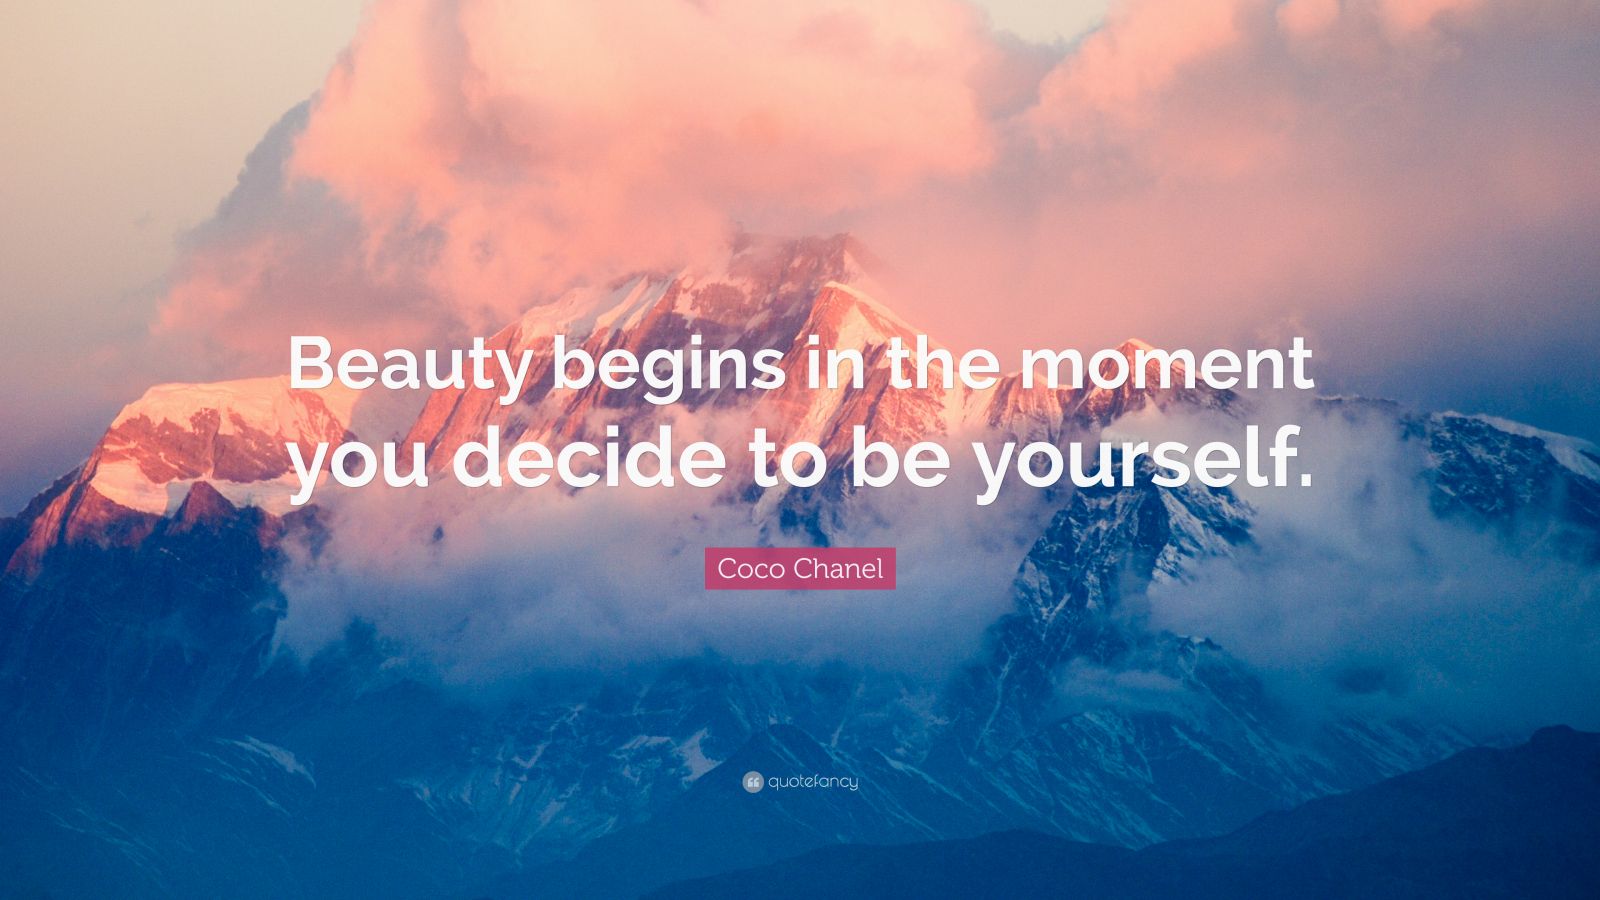 "beauty begins in the moment you decide to be yourself.